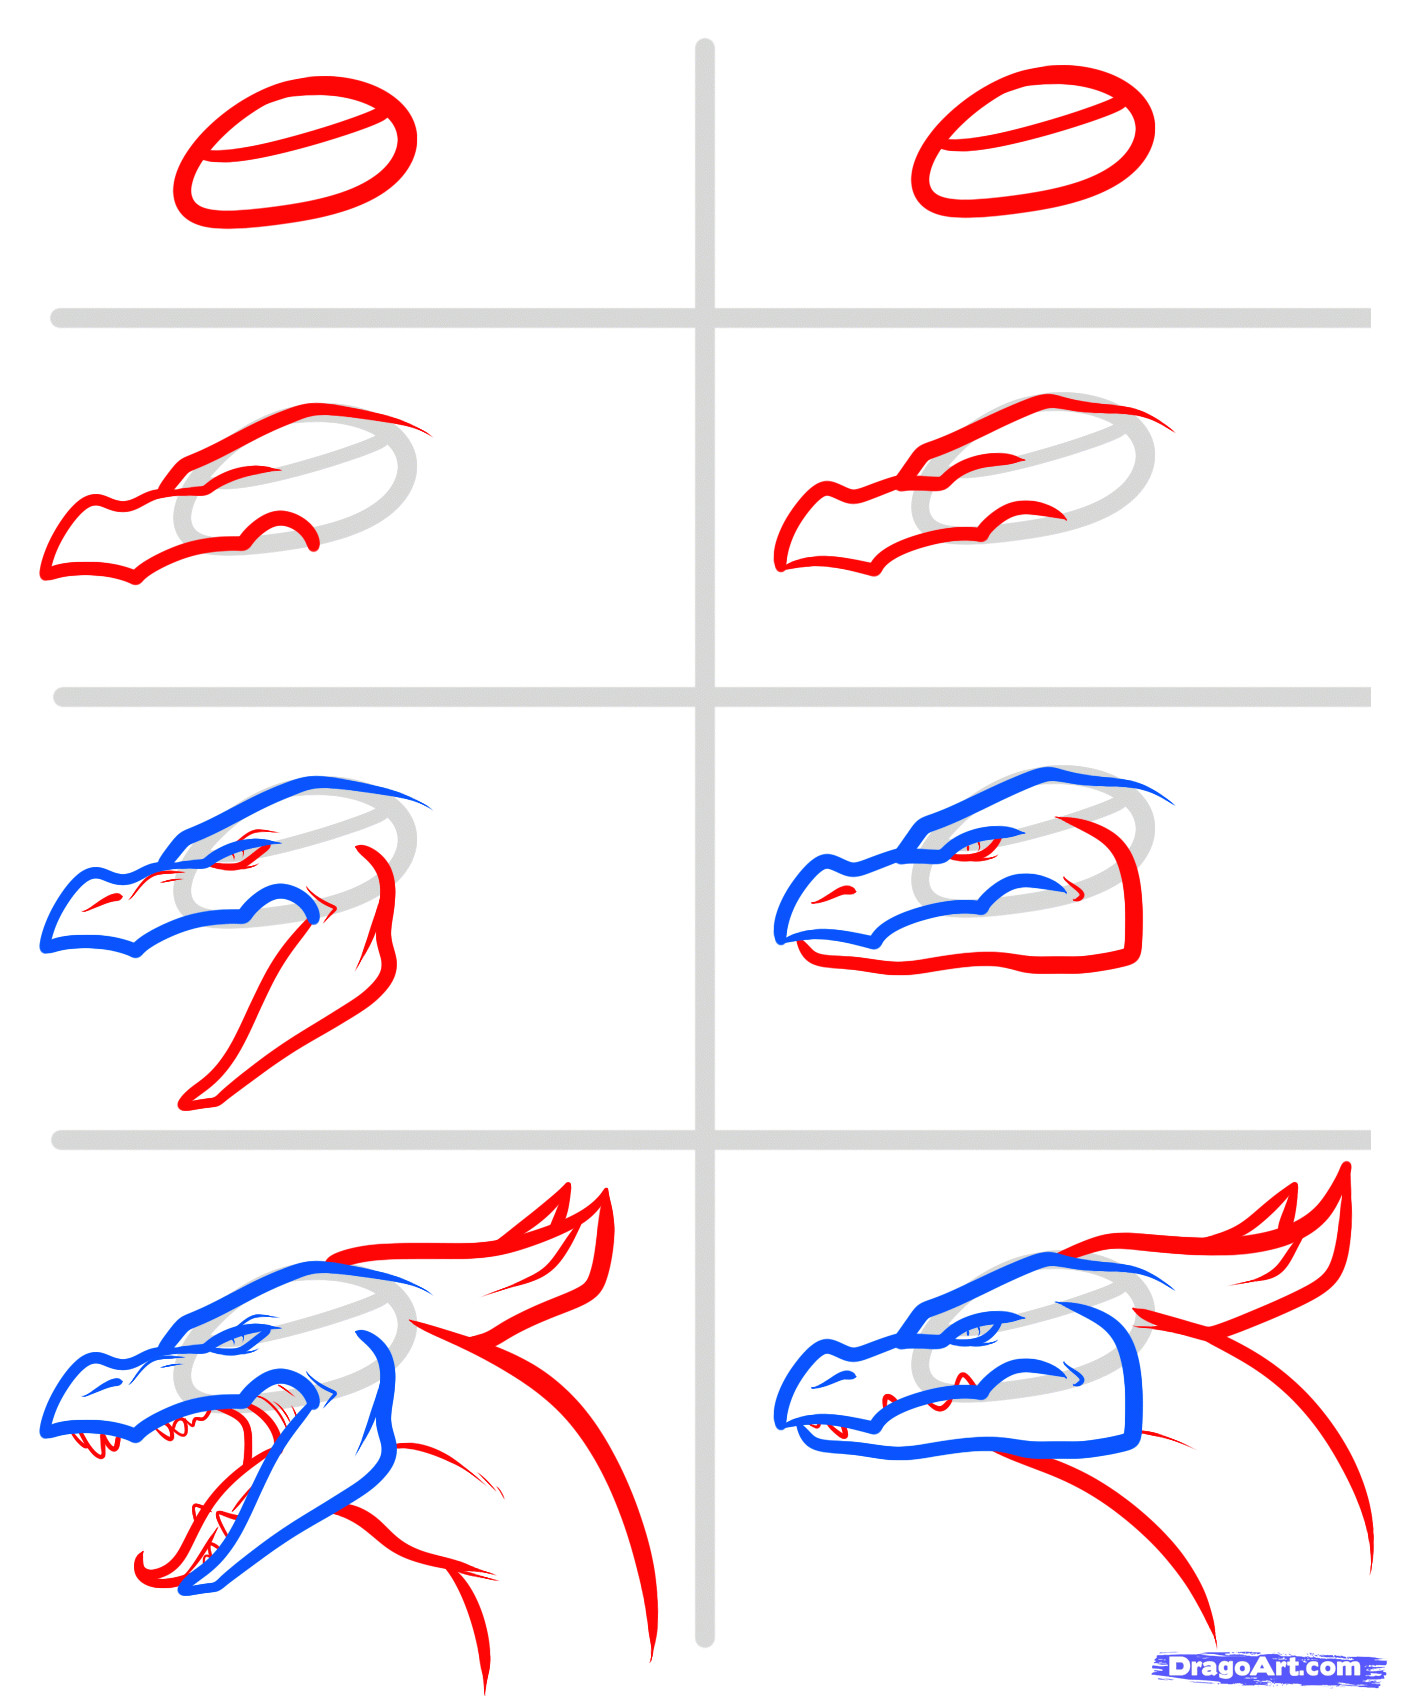 Drawings Of Dragons Blowing Fire How to Draw A Fire Breathing Dragon Dragons Breathing Fire Step 8